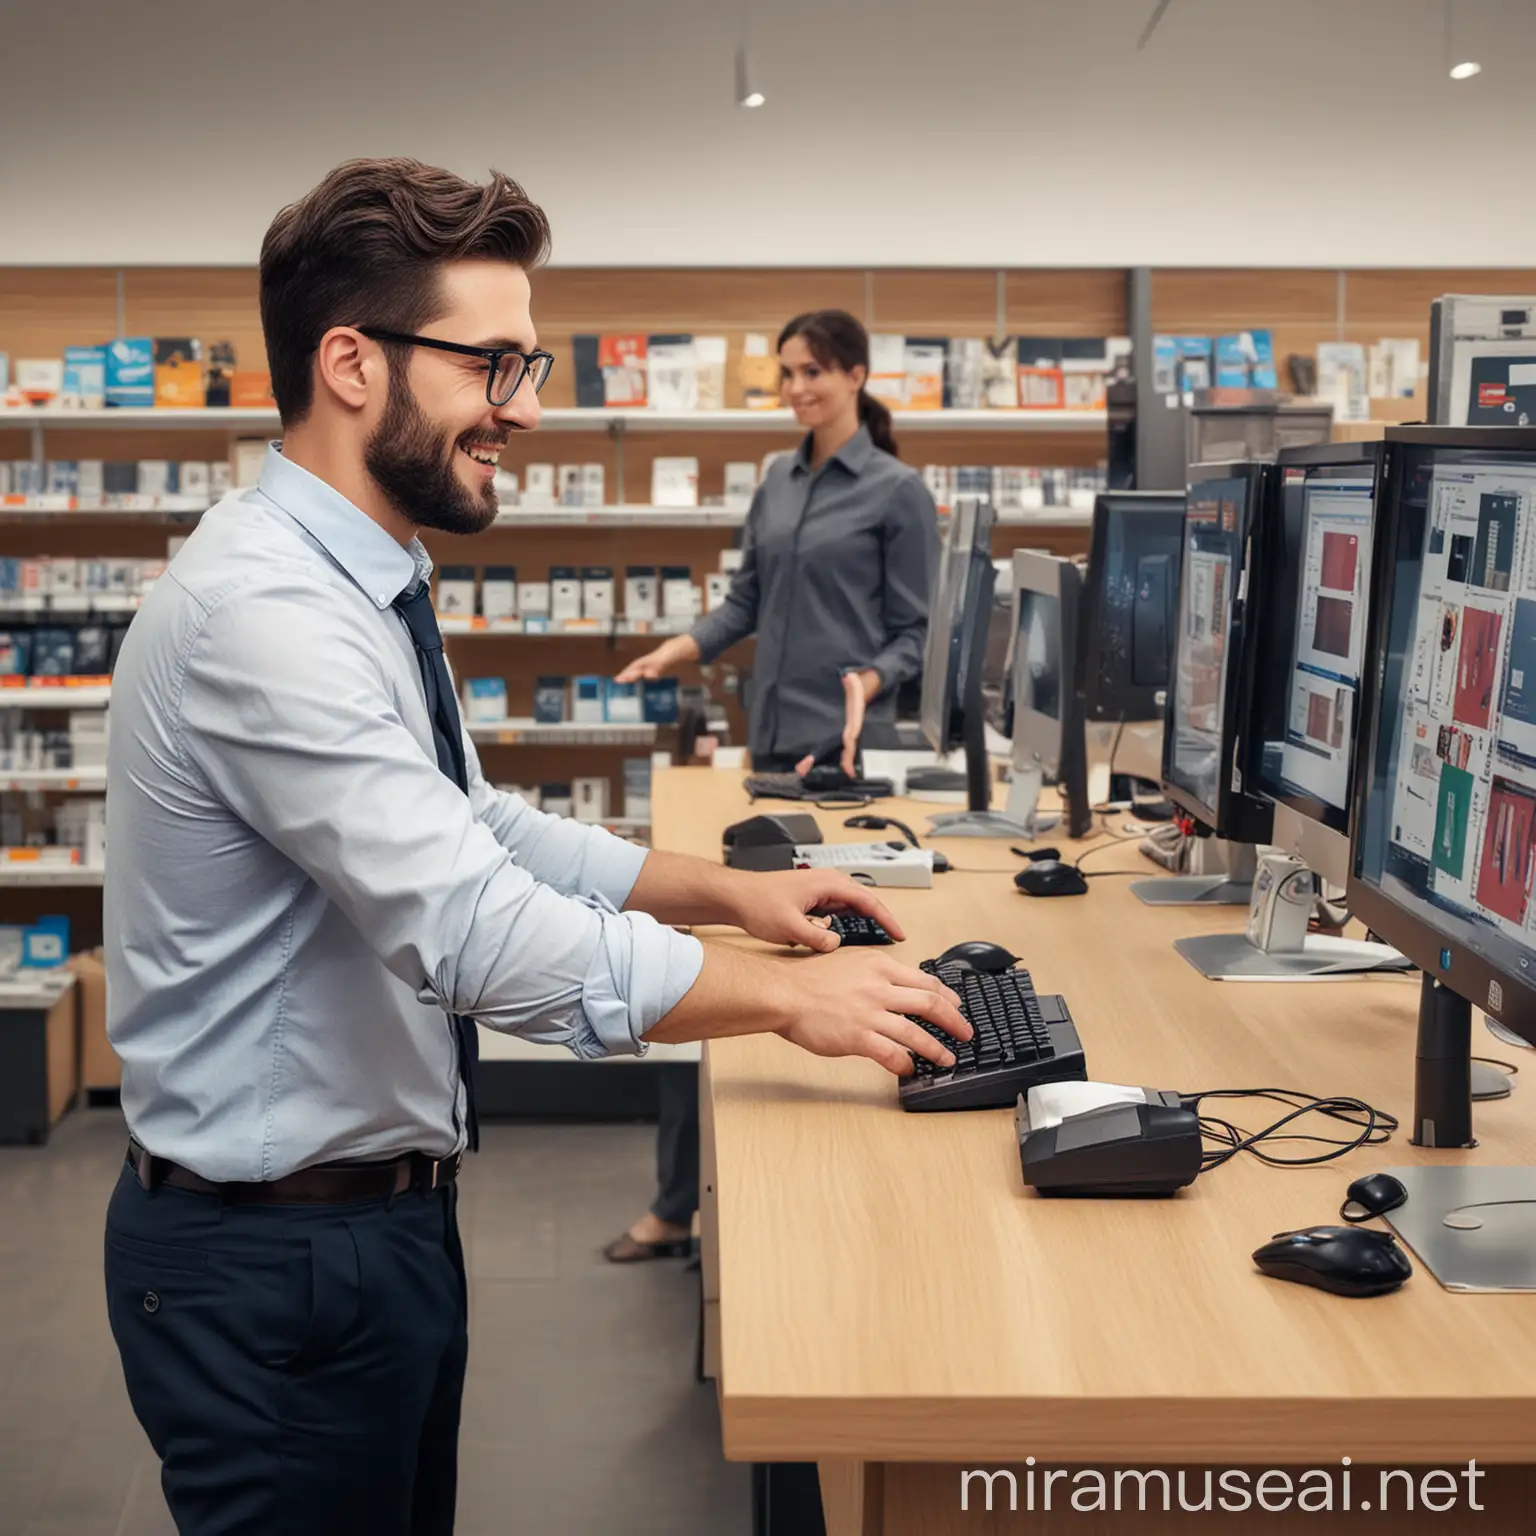 Computer Store Salesman Assisting Customer with Accessories